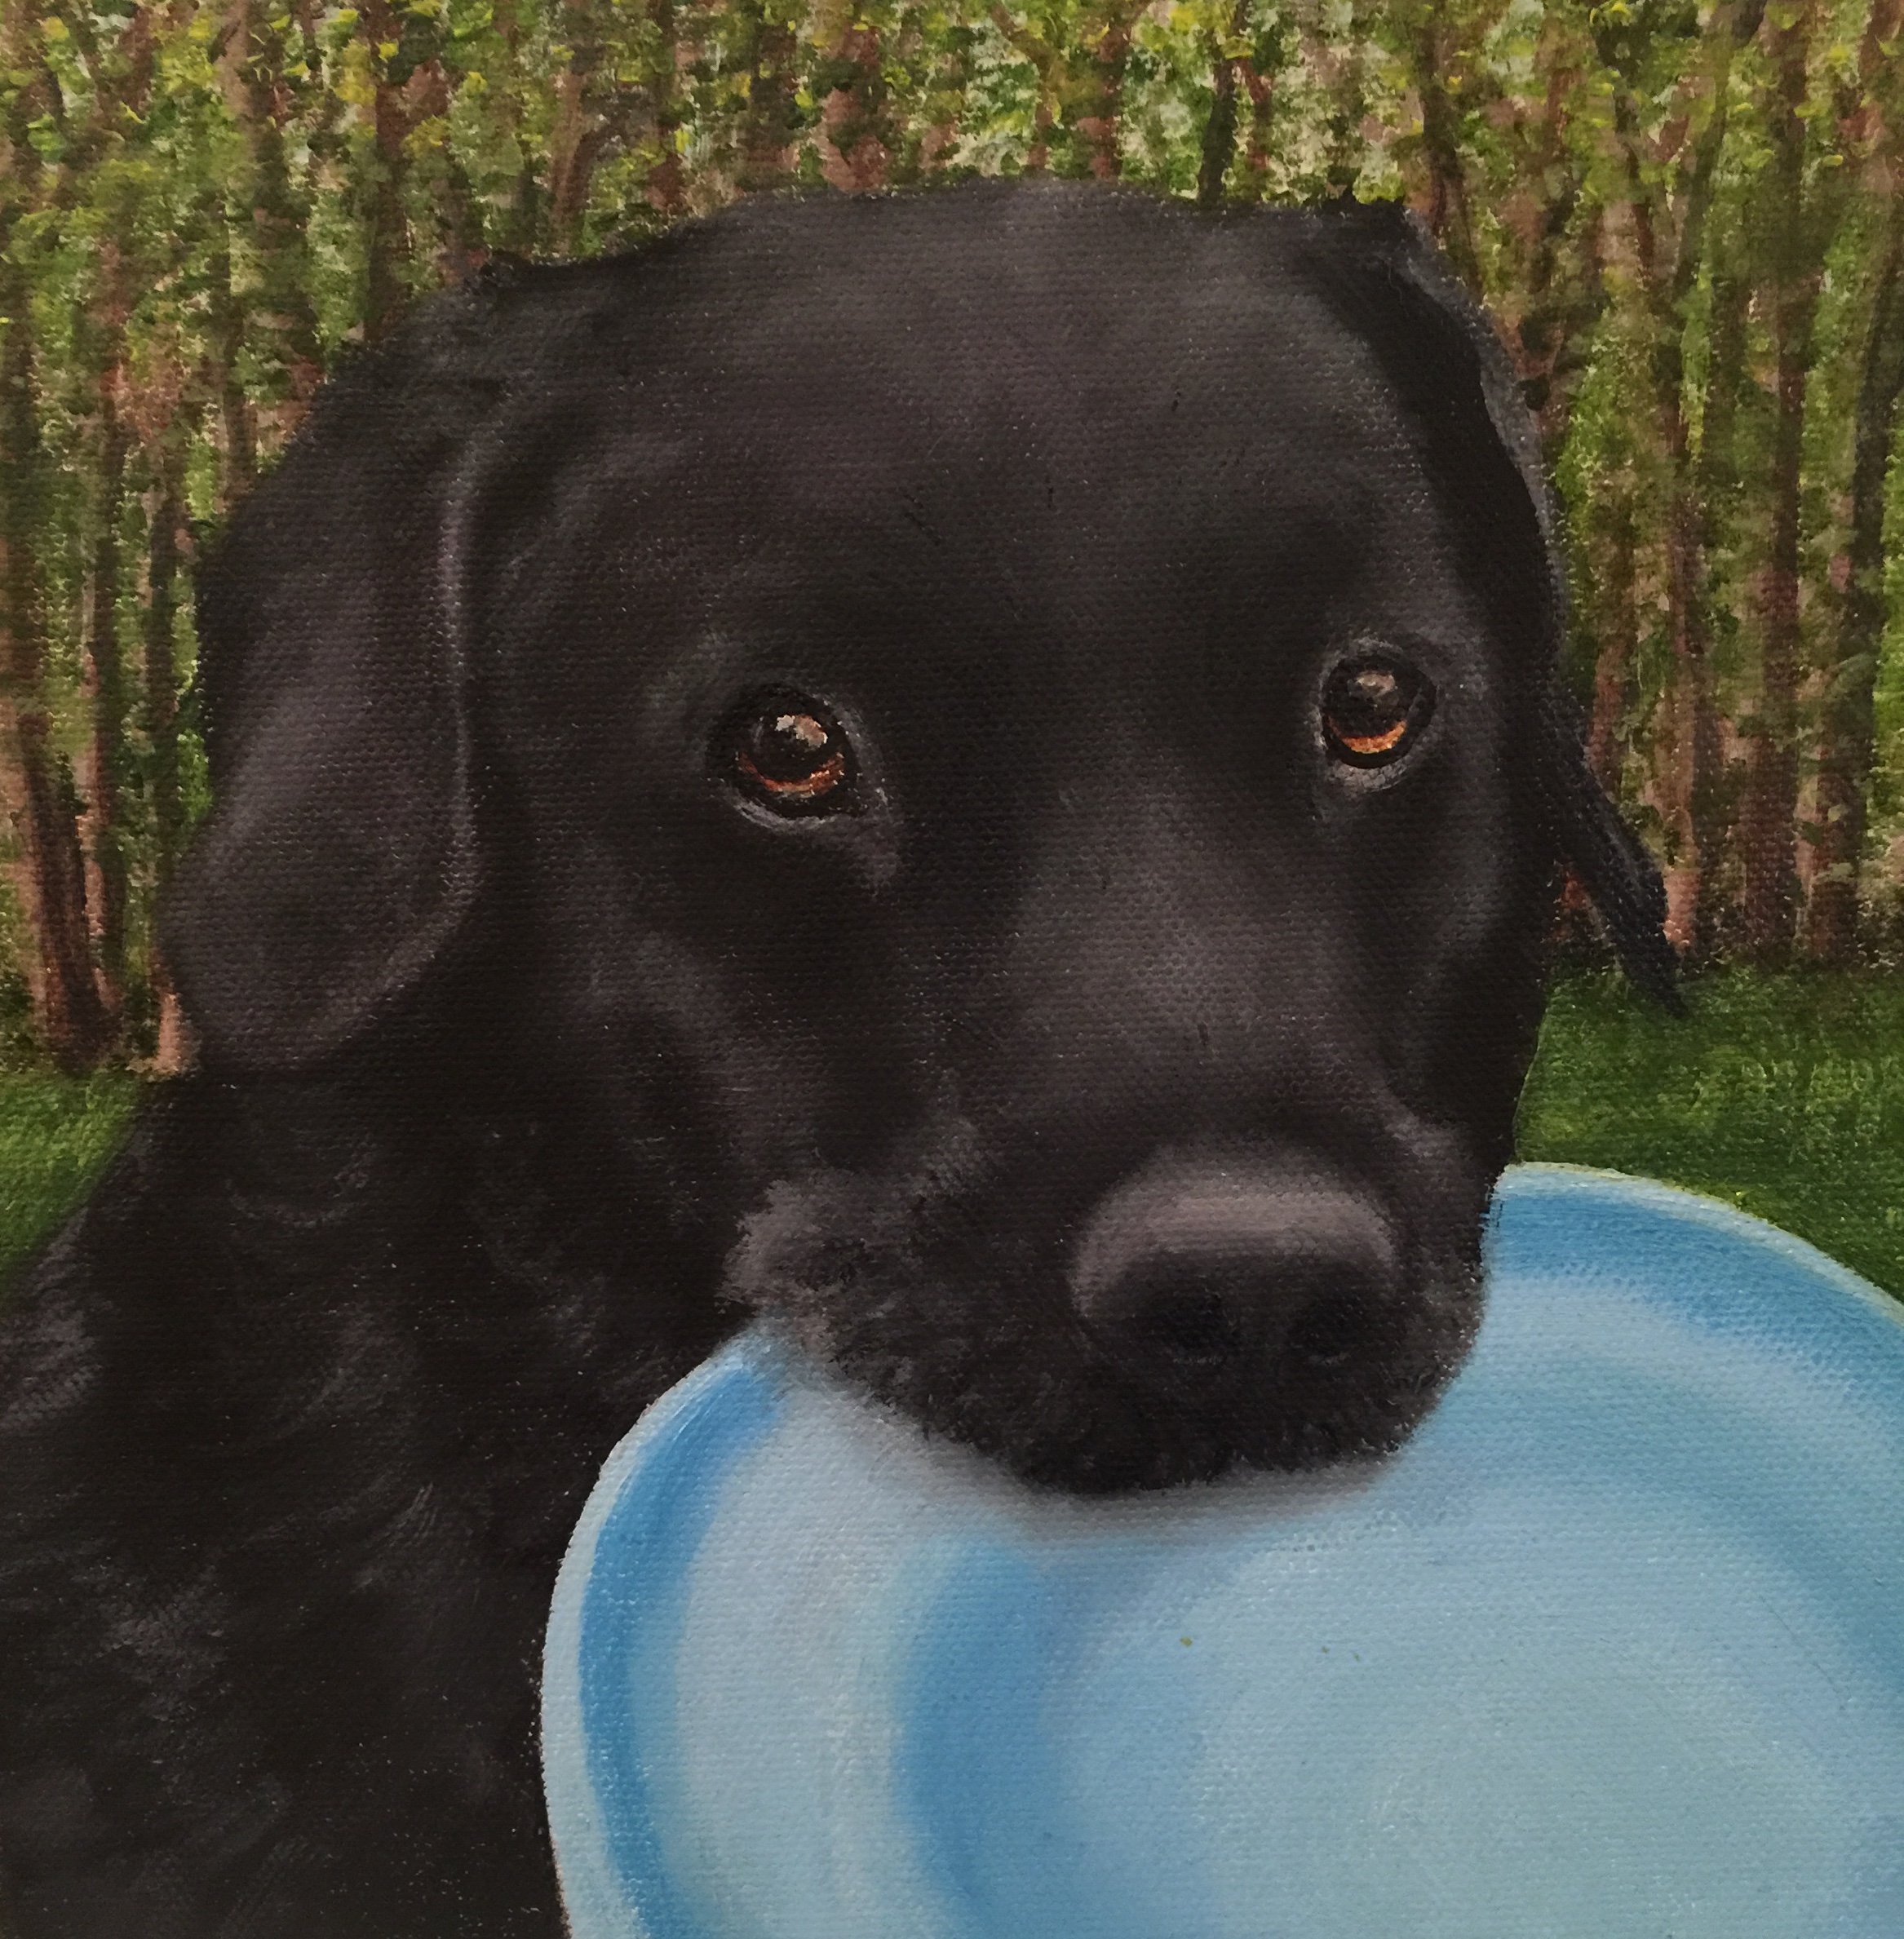 Jack and His Frisbee